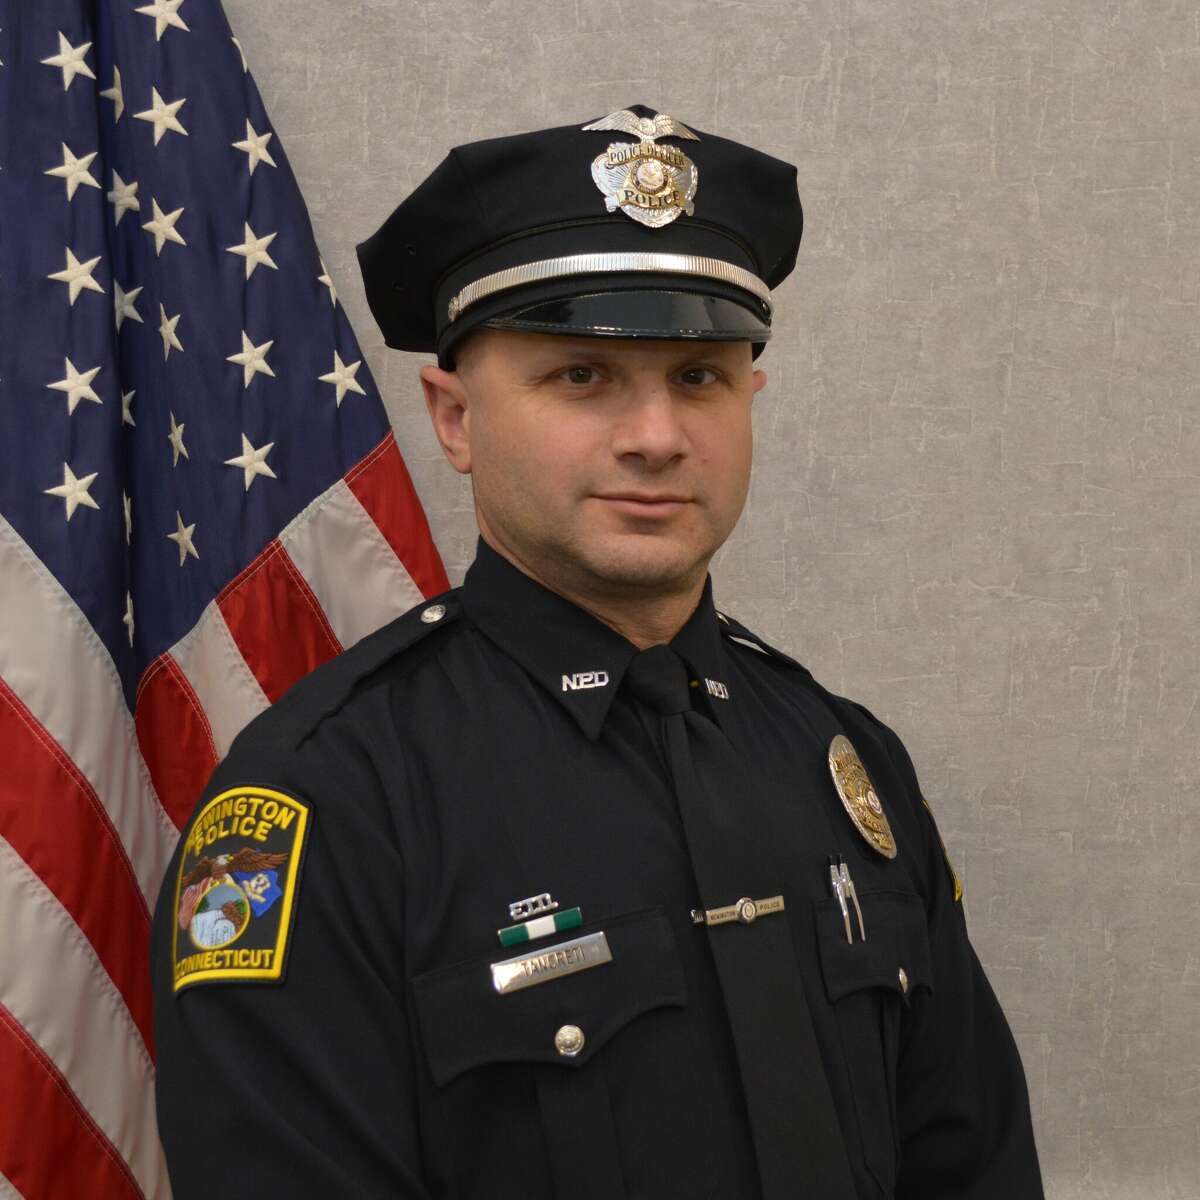 Newington Police Officer Alan Tancreti died Saturday after an "unexpected medical emergency" at home, according to Newington police.